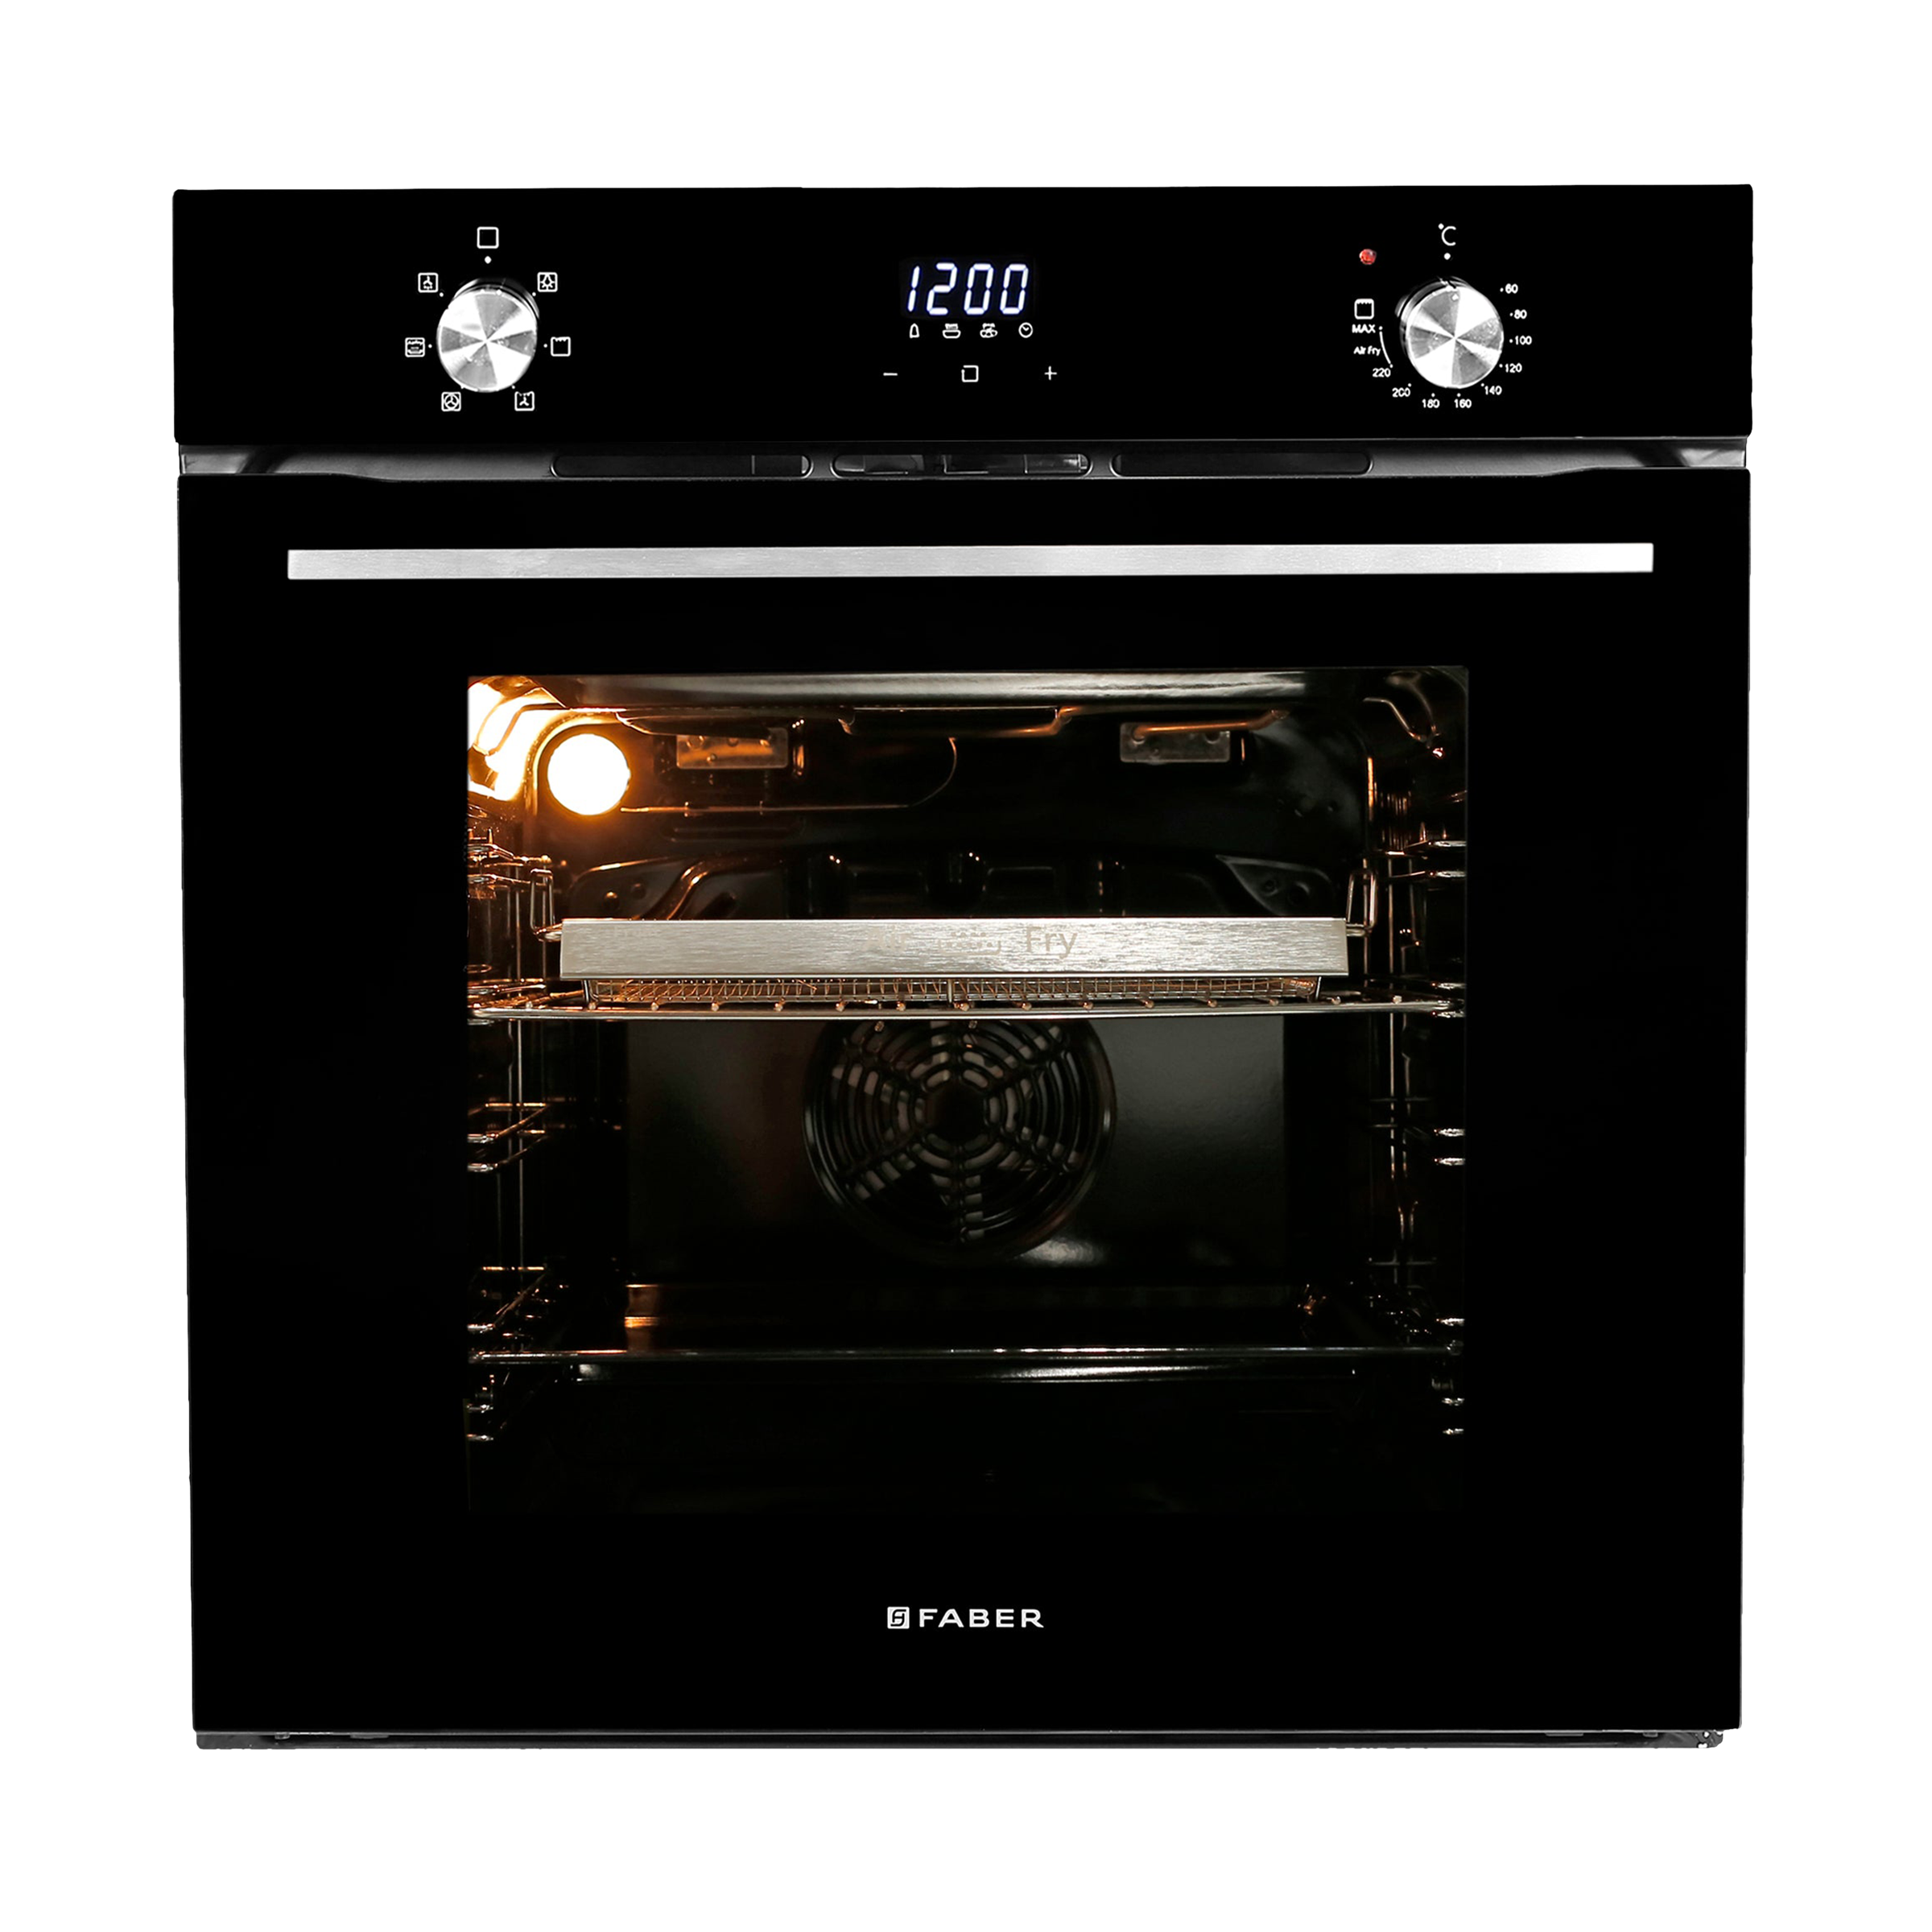 Faber FBIO 83 Litres Built-in Microwave Oven (Hot Air Technology, 131.0651.880, Black)_4